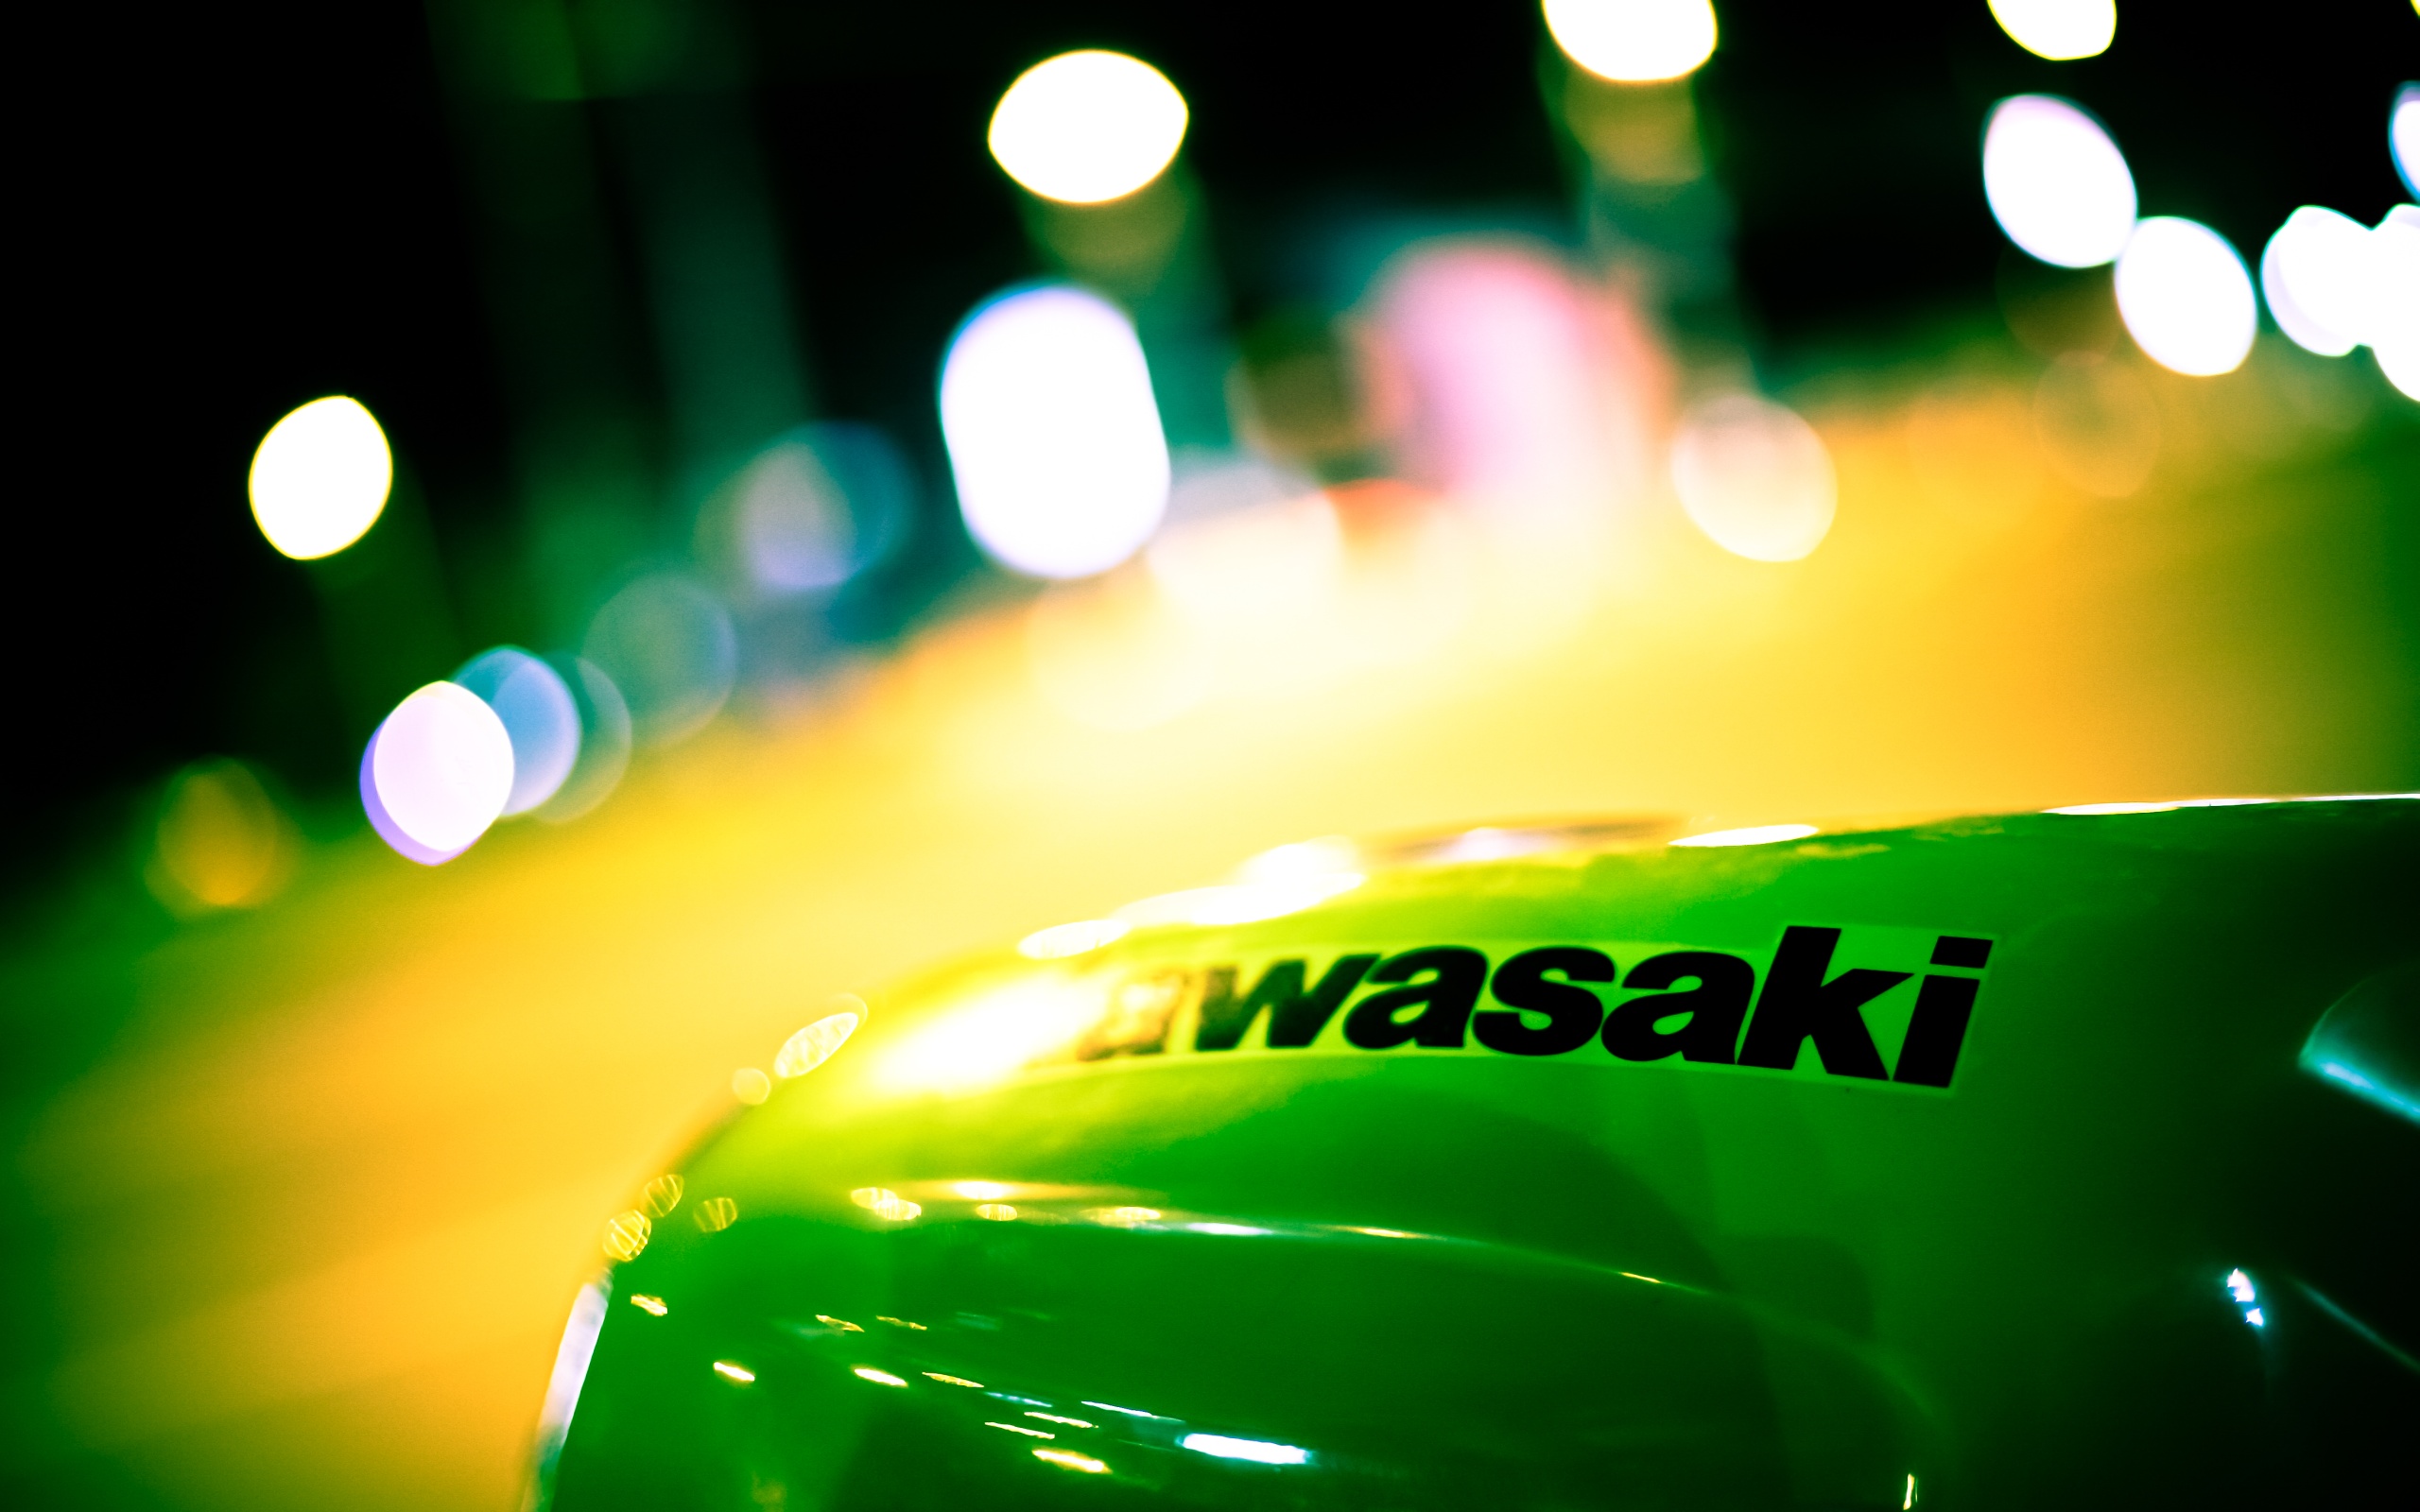 Download the following Kawasaki Logo Wallpaper 22838 by clicking the orange button positioned underneath the "Download Wallpaper" section.